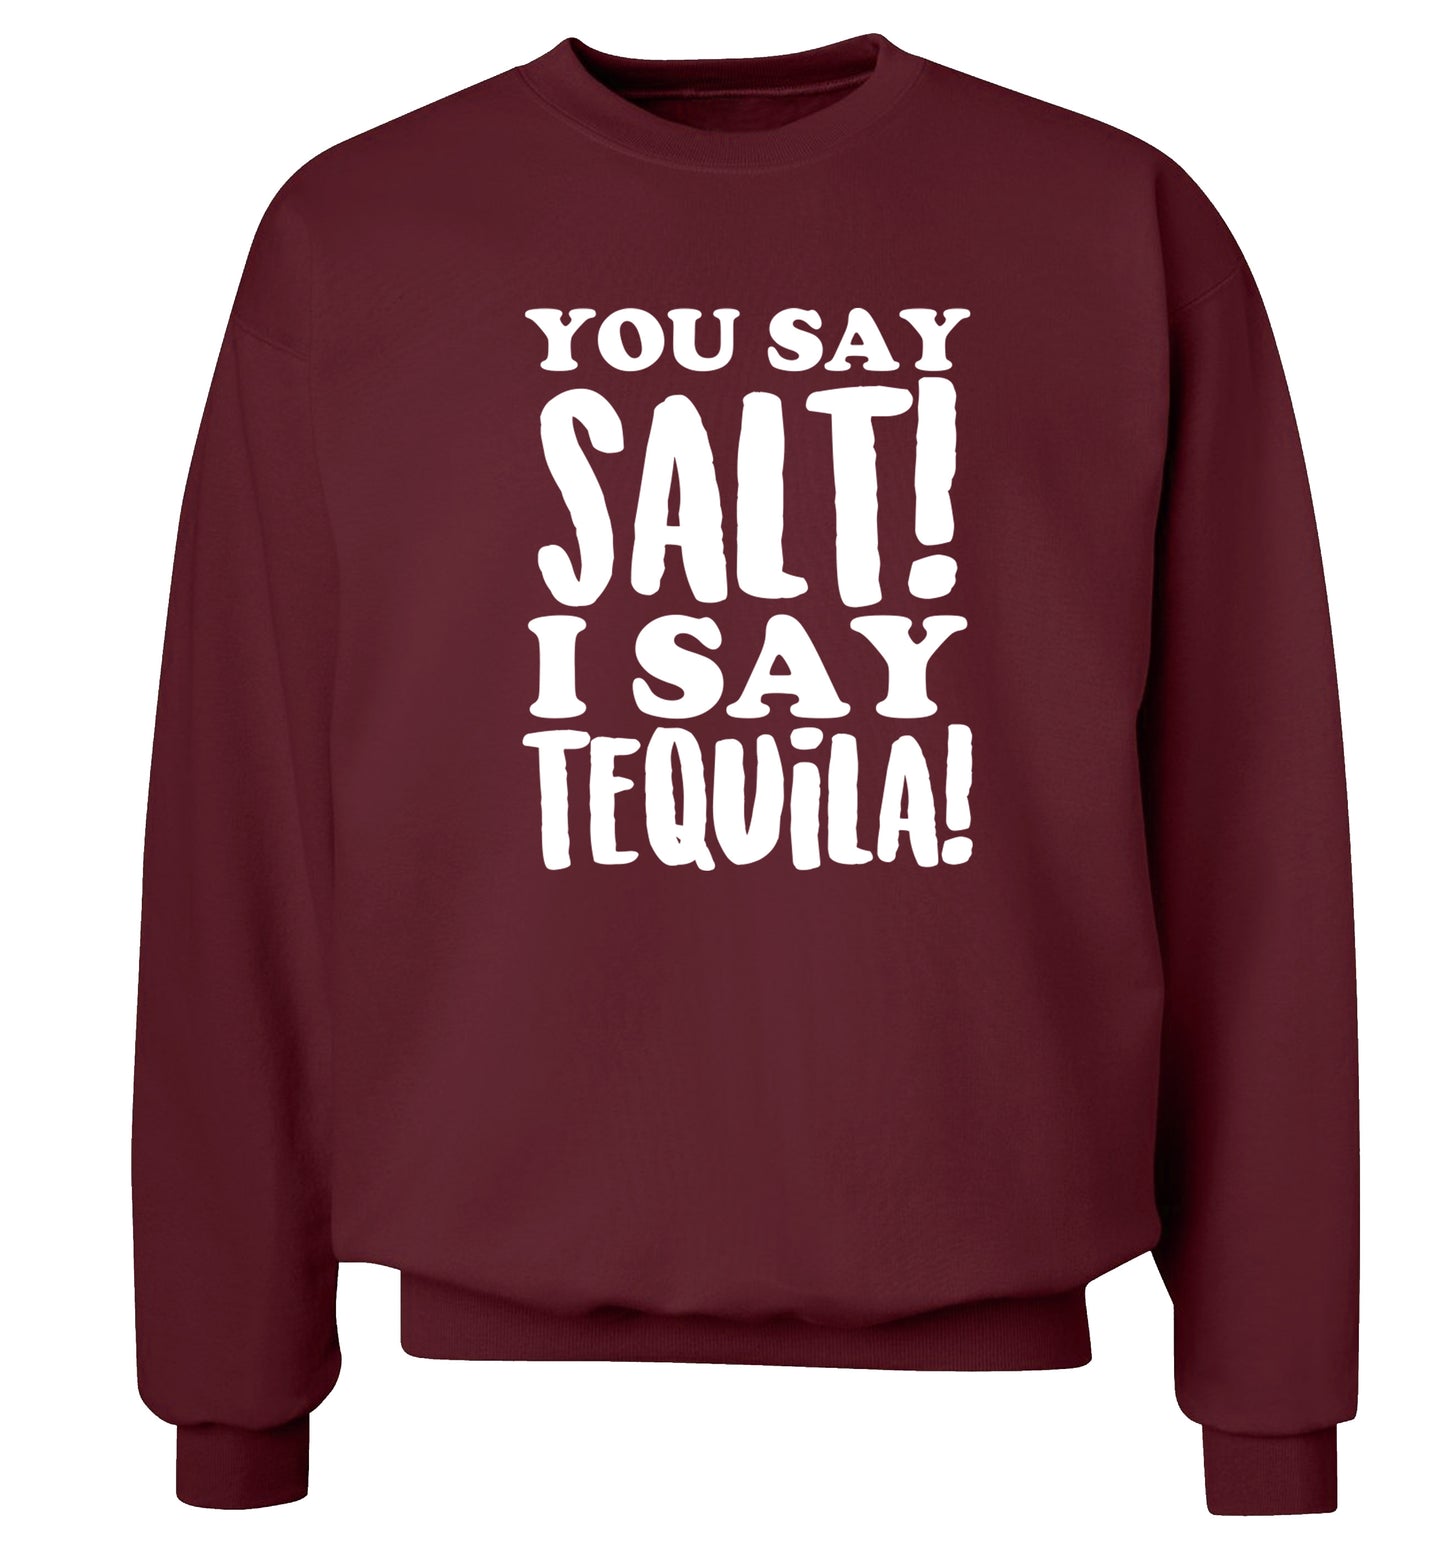 You say salt I say tequila Adult's unisex maroon Sweater 2XL